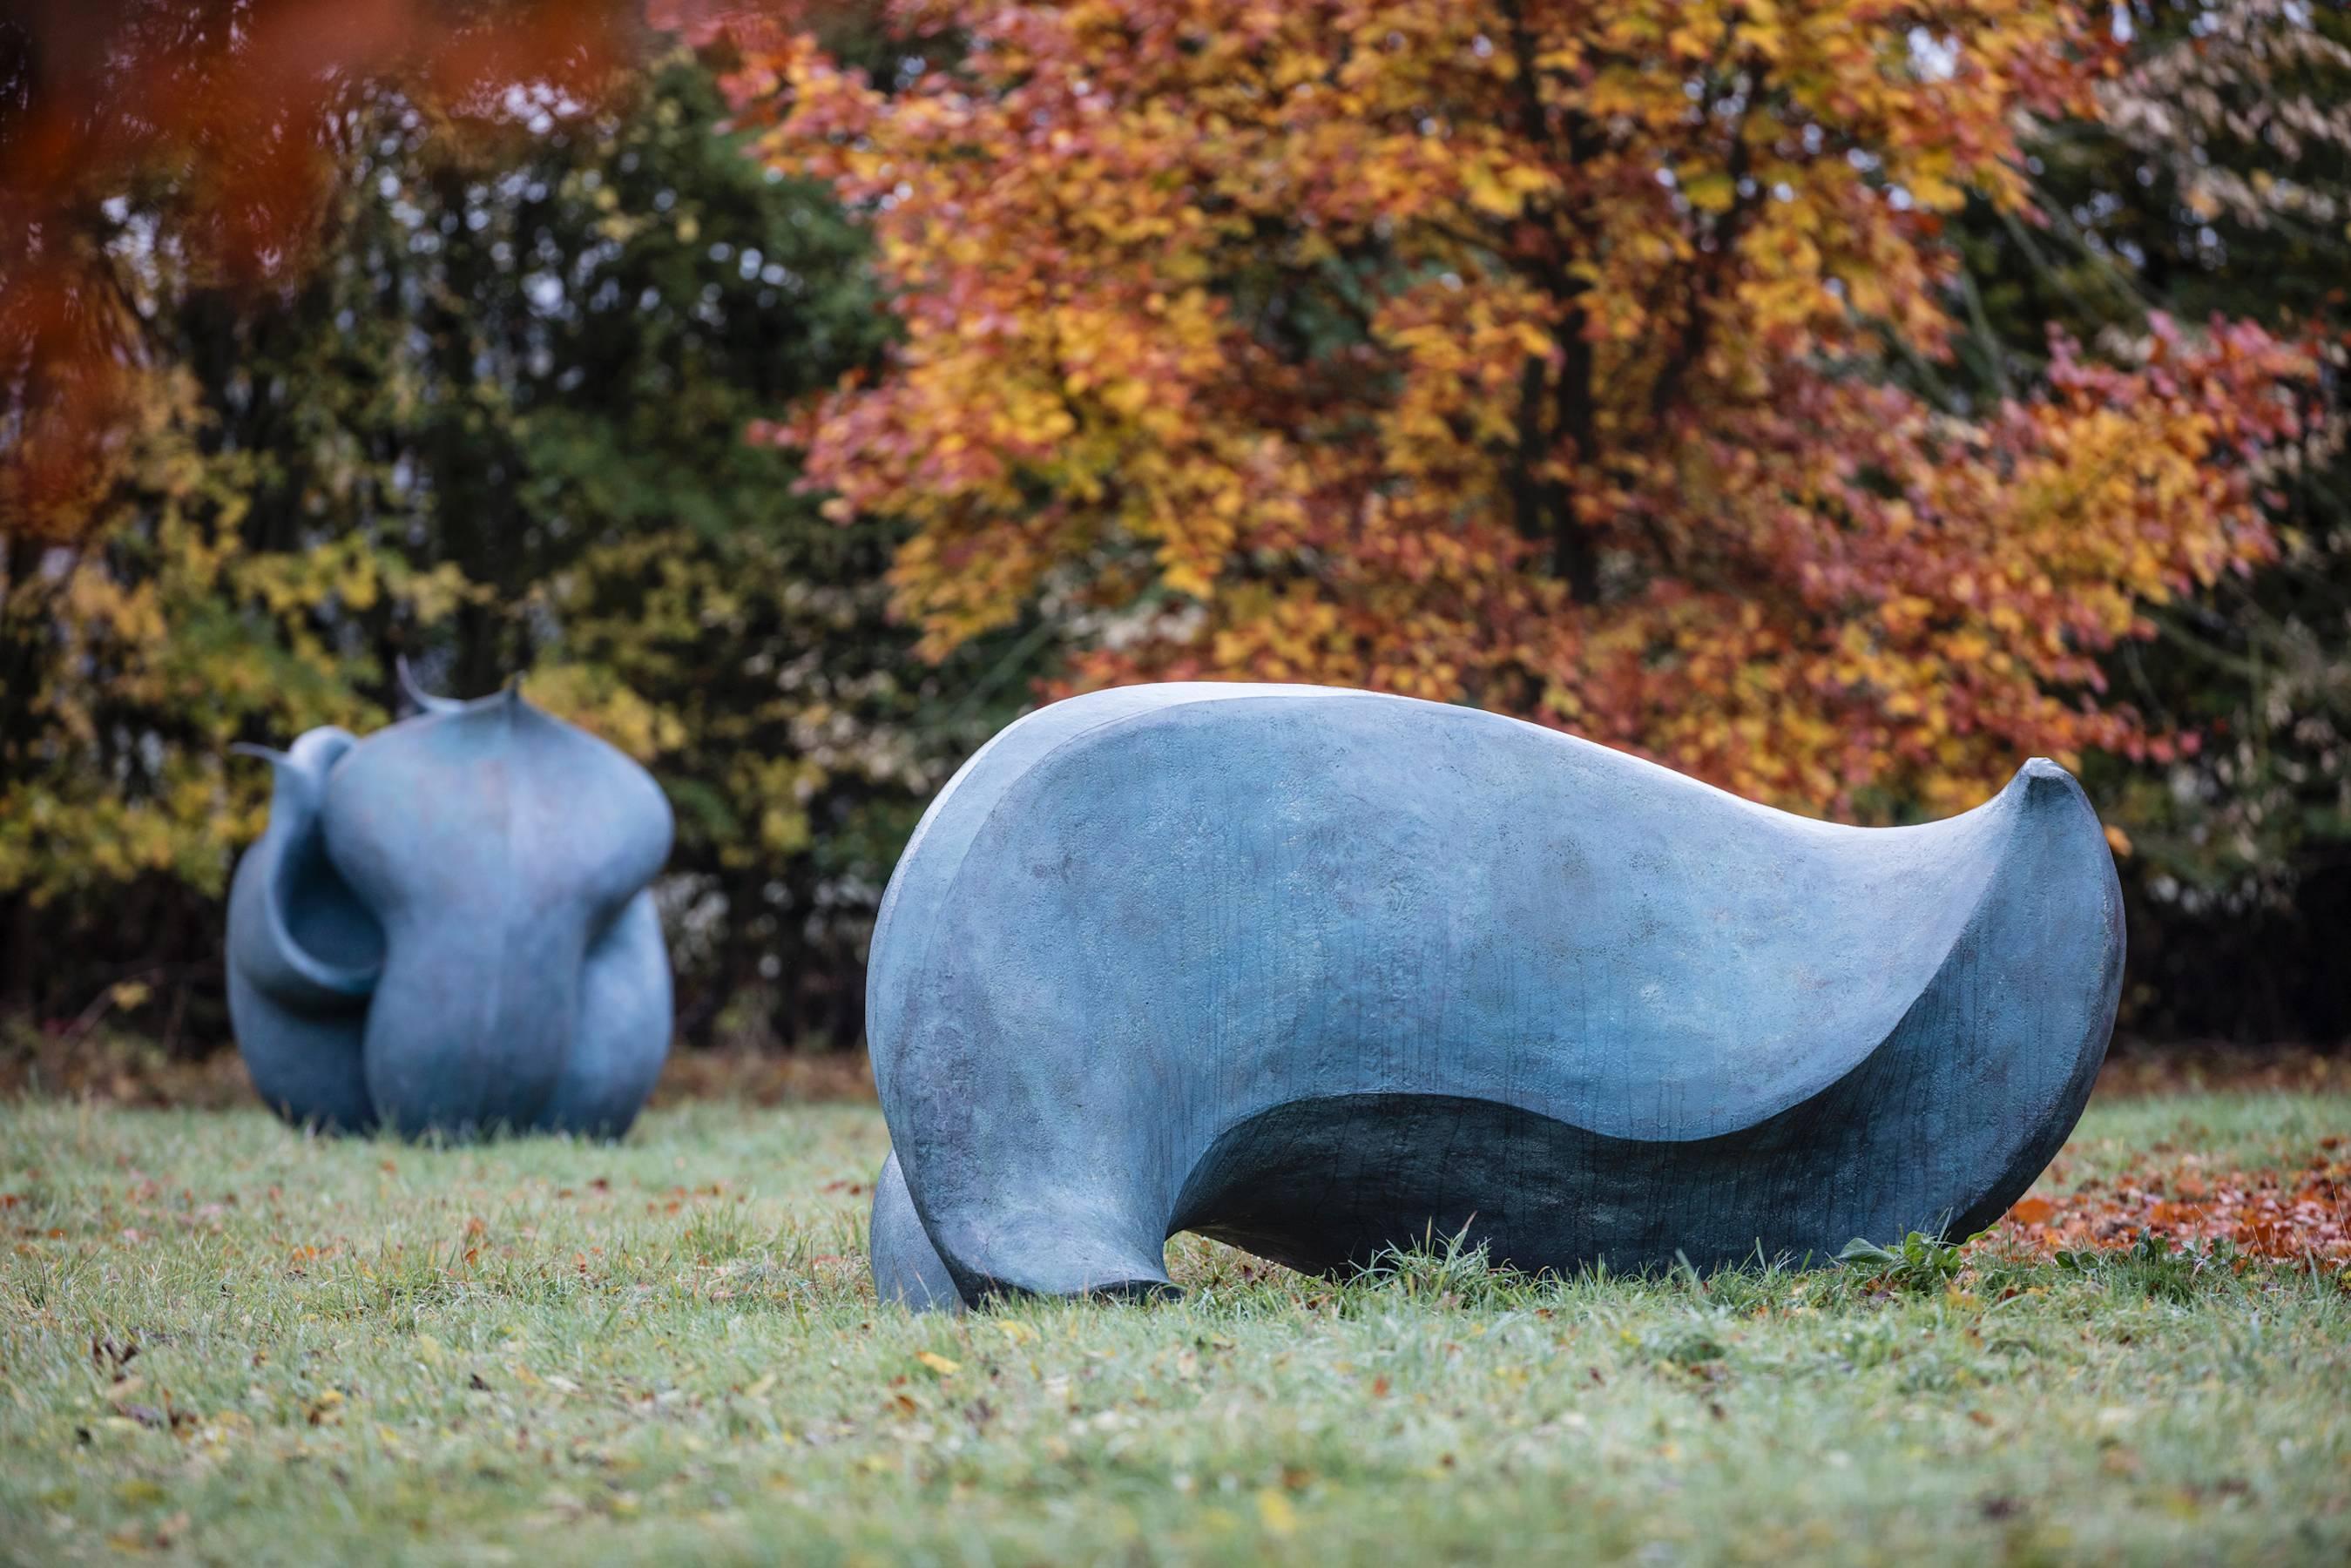 Anne Curry is a member of the Royal British Society of Sculptors. Her outdoor sculpture has been exhibited at major exhibition gardens around the UK including the Royal Botanic Gardens at Kew, at the globally renowned Venice Biennale, and her work